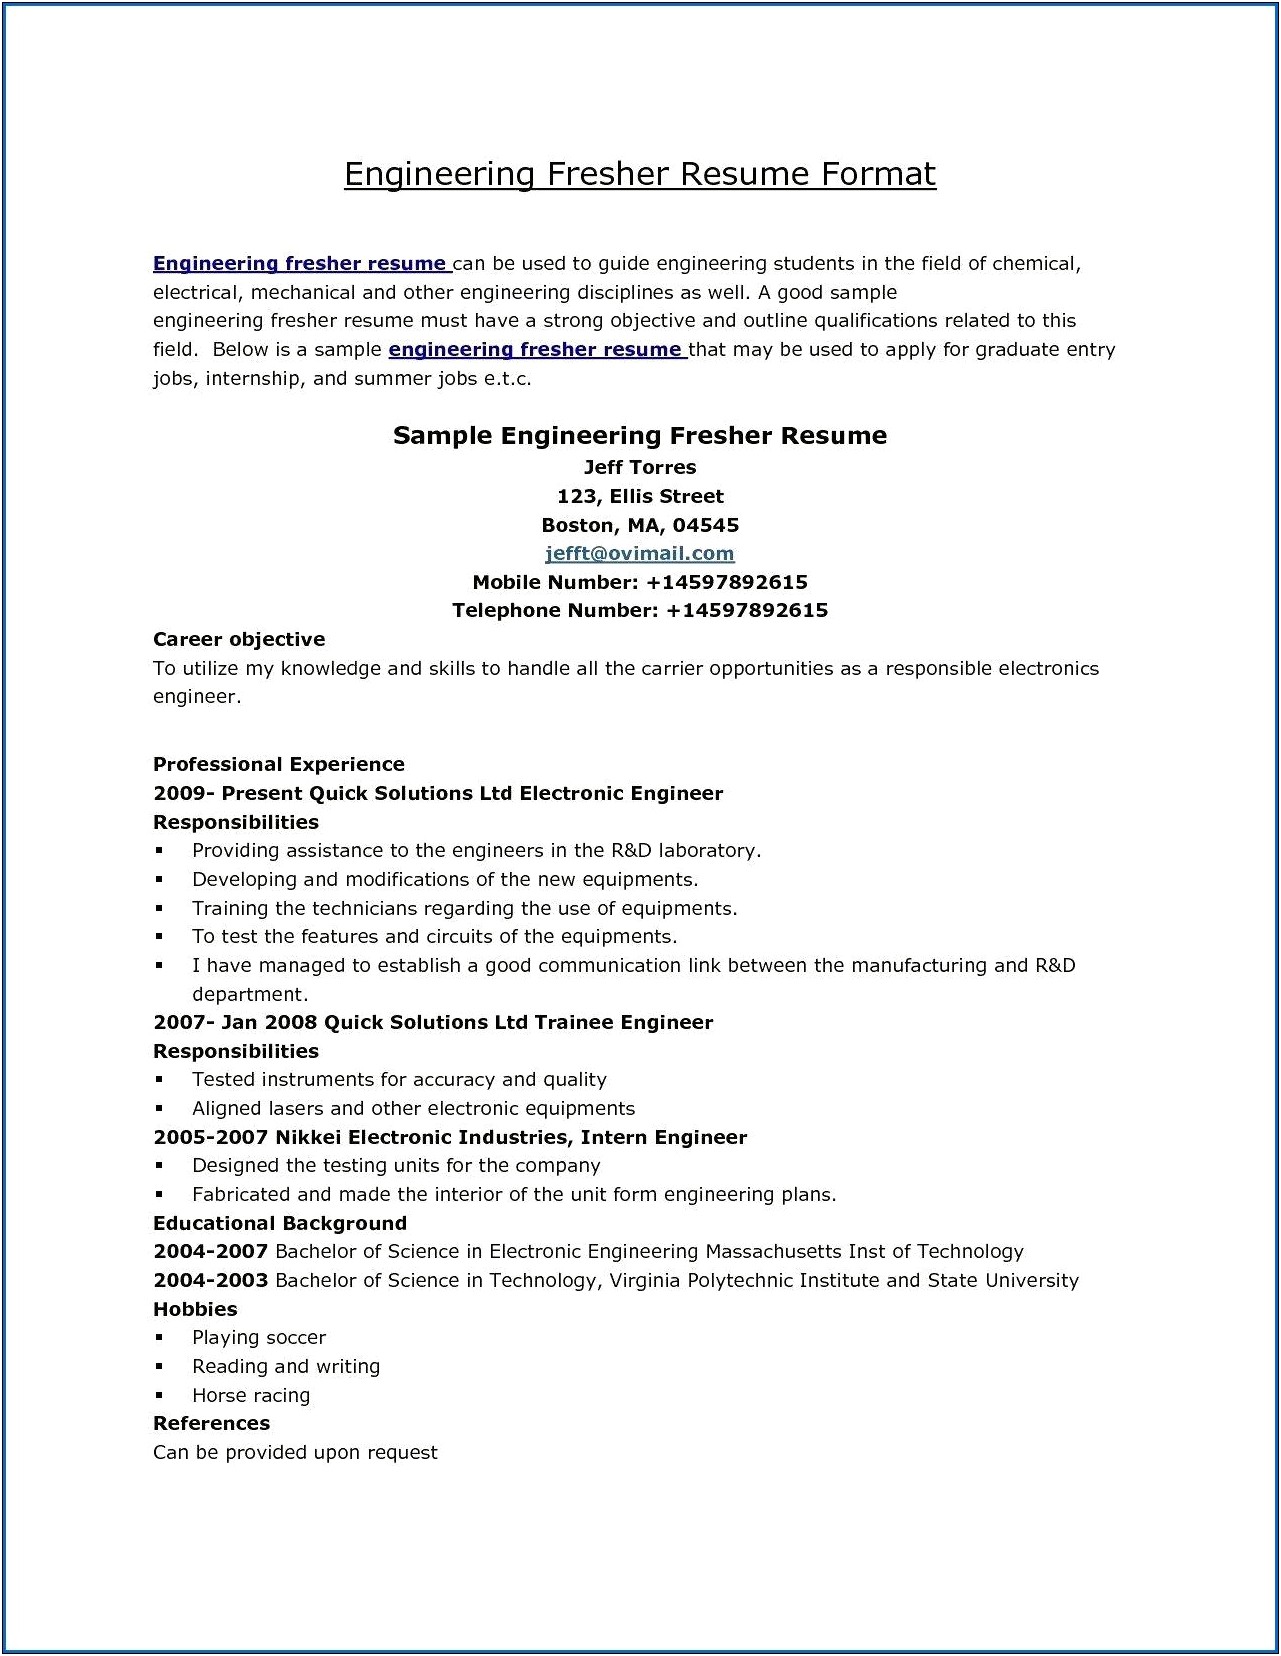 Resume Objectives For Mechanical Engineering Freshers